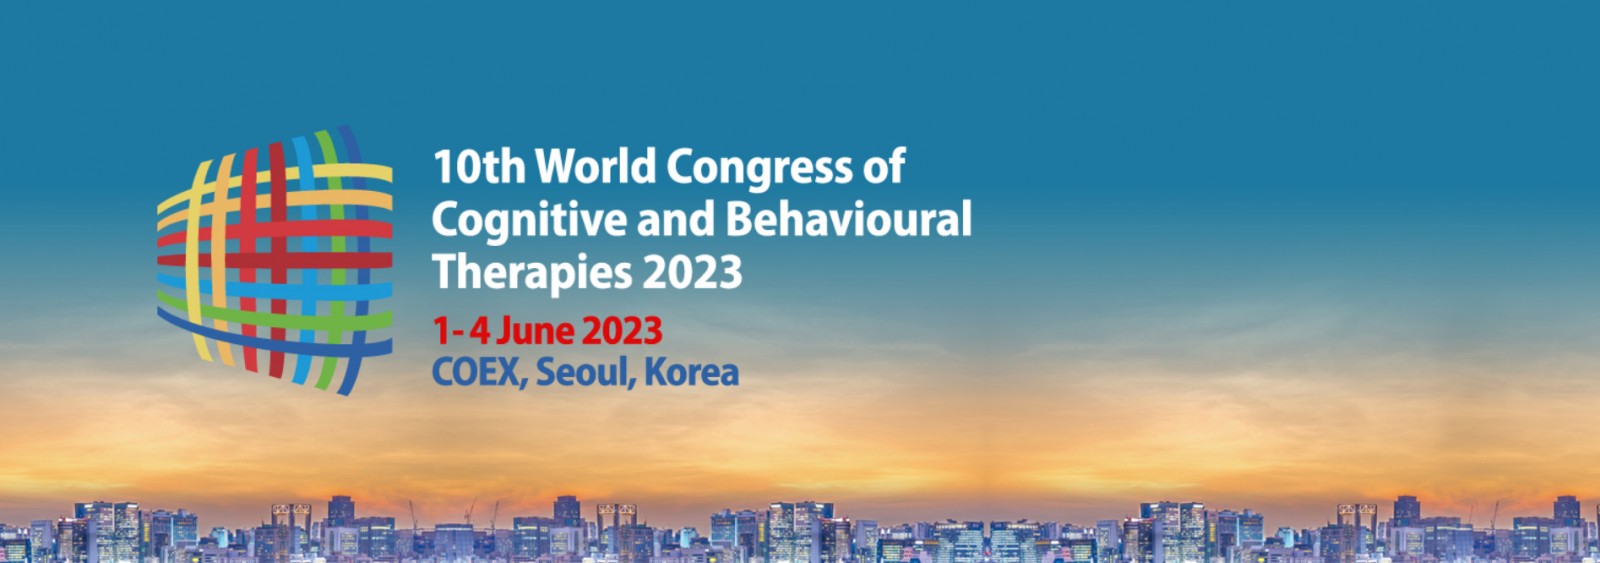 10th World Congress of Cognitive and Behavioural Therapies 2023.jpg